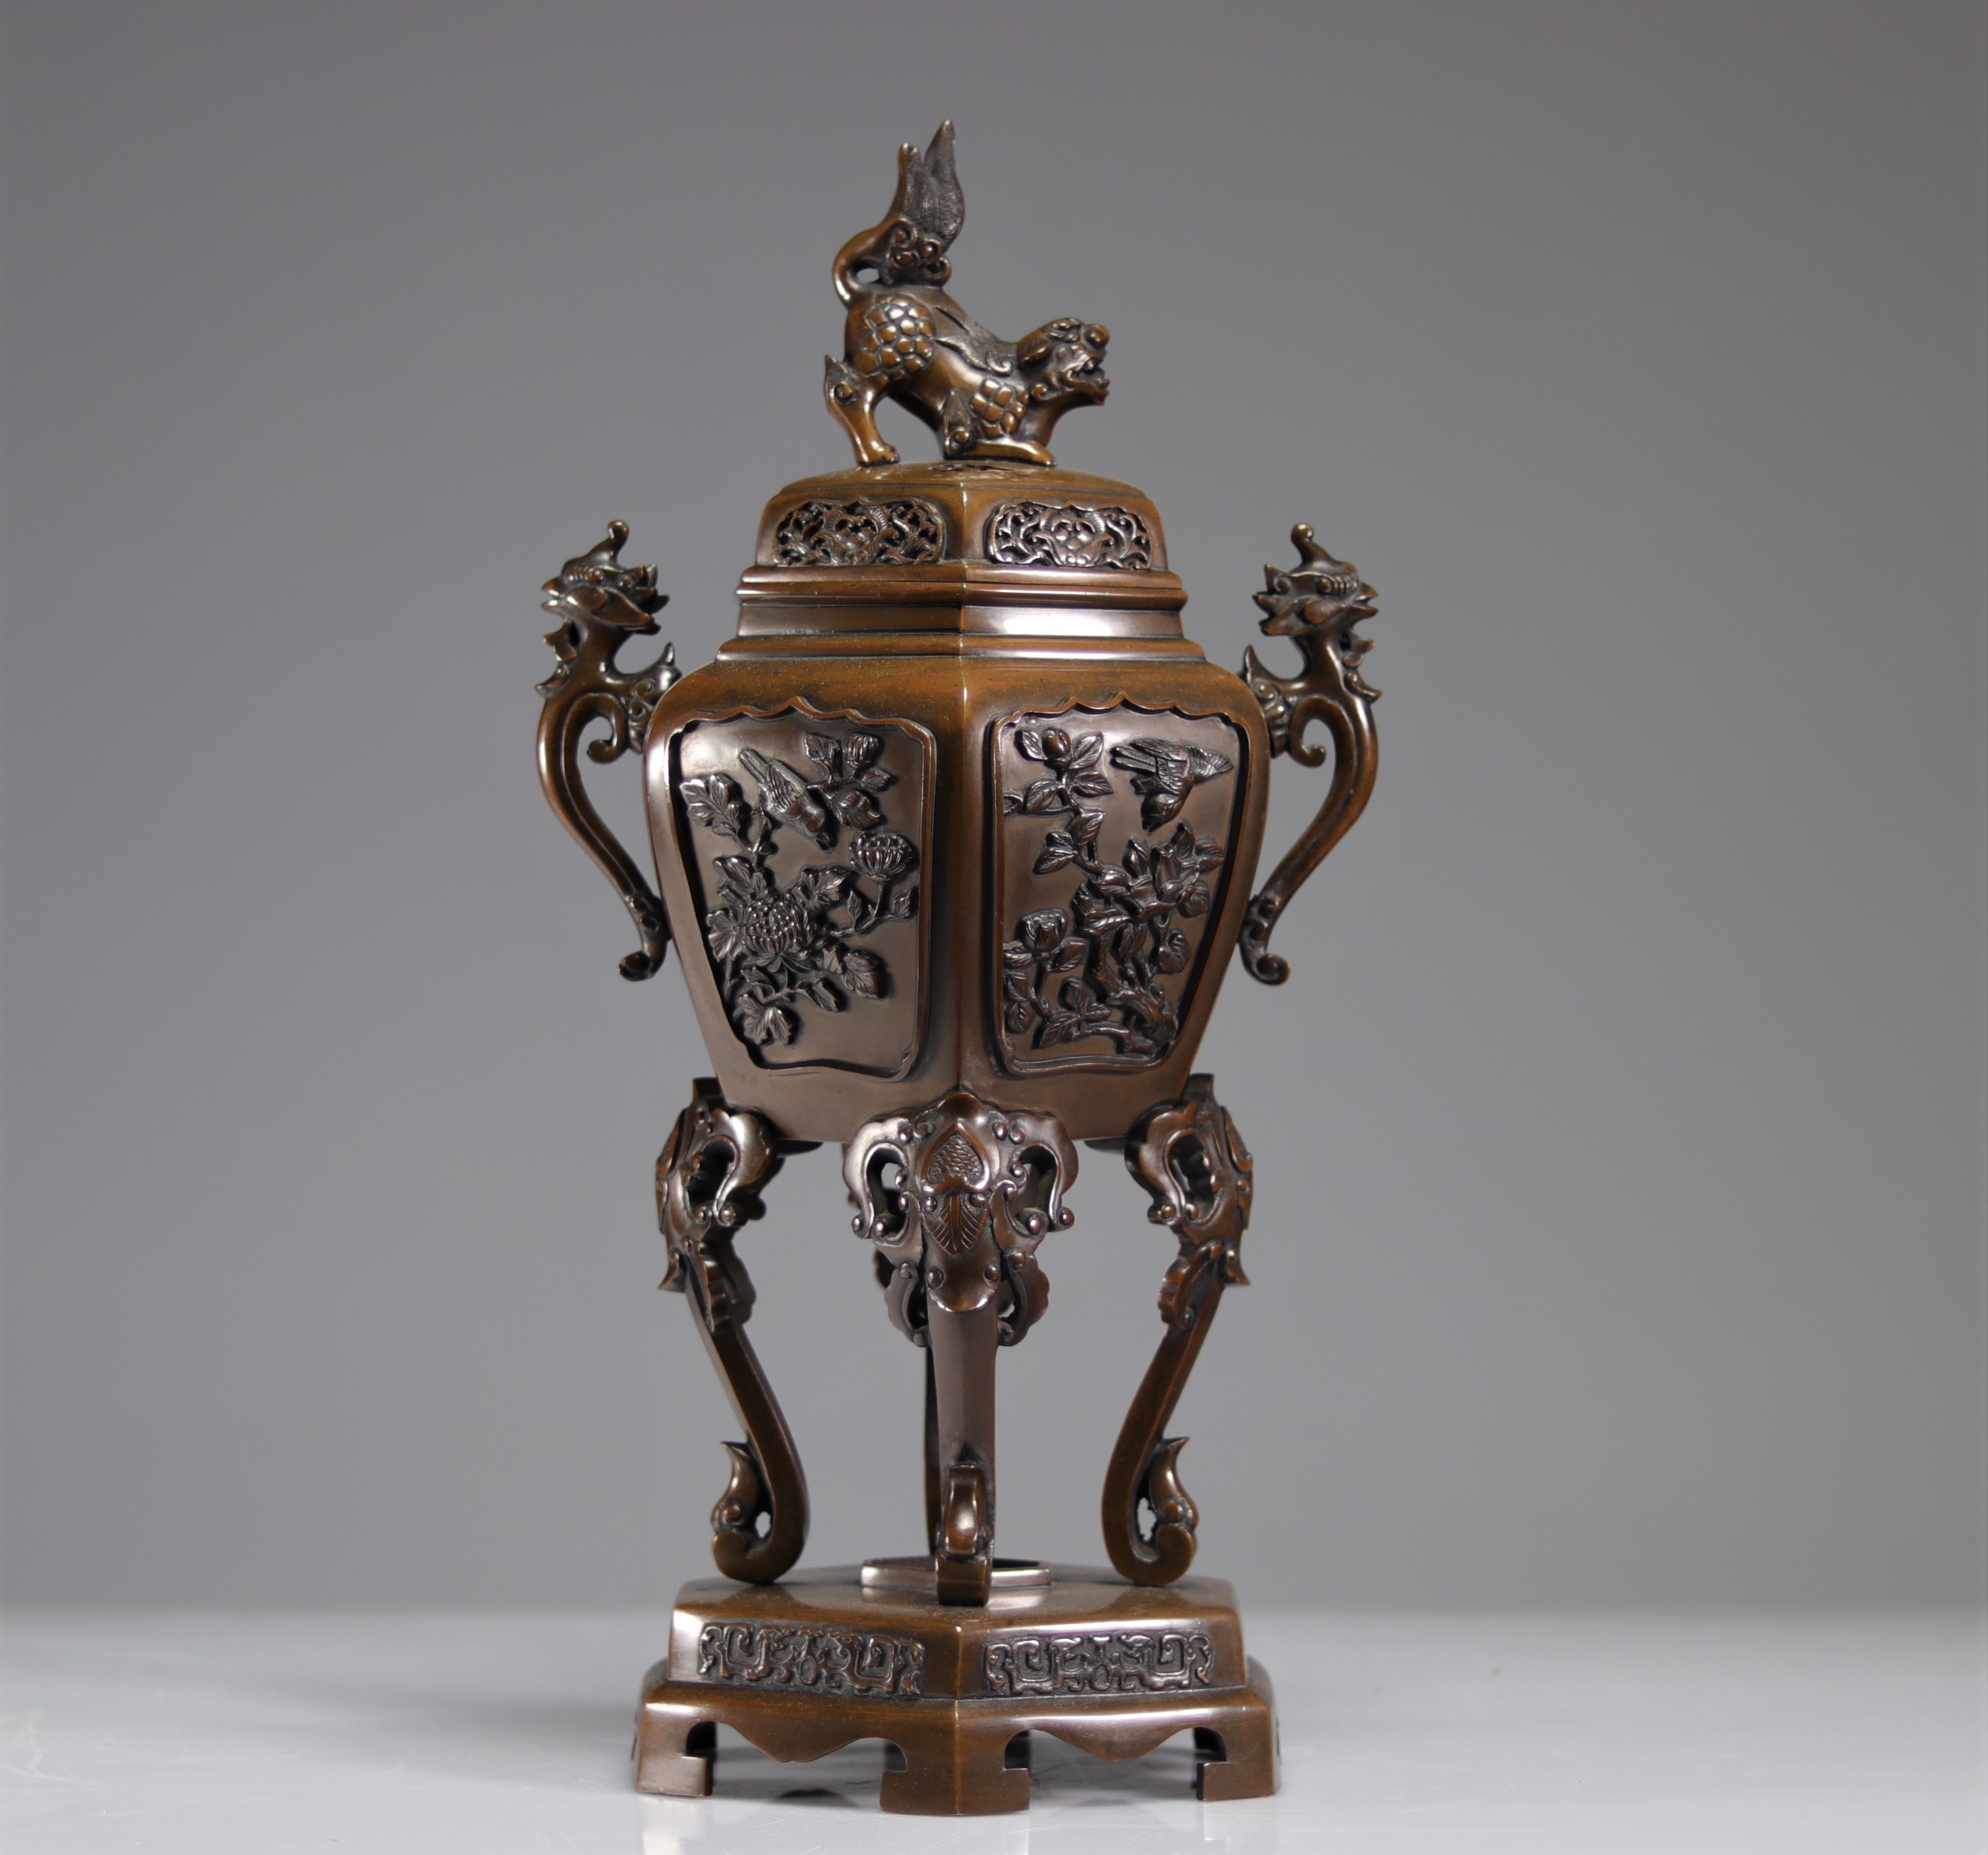 Japanese bronze incense burner from the Meiji period